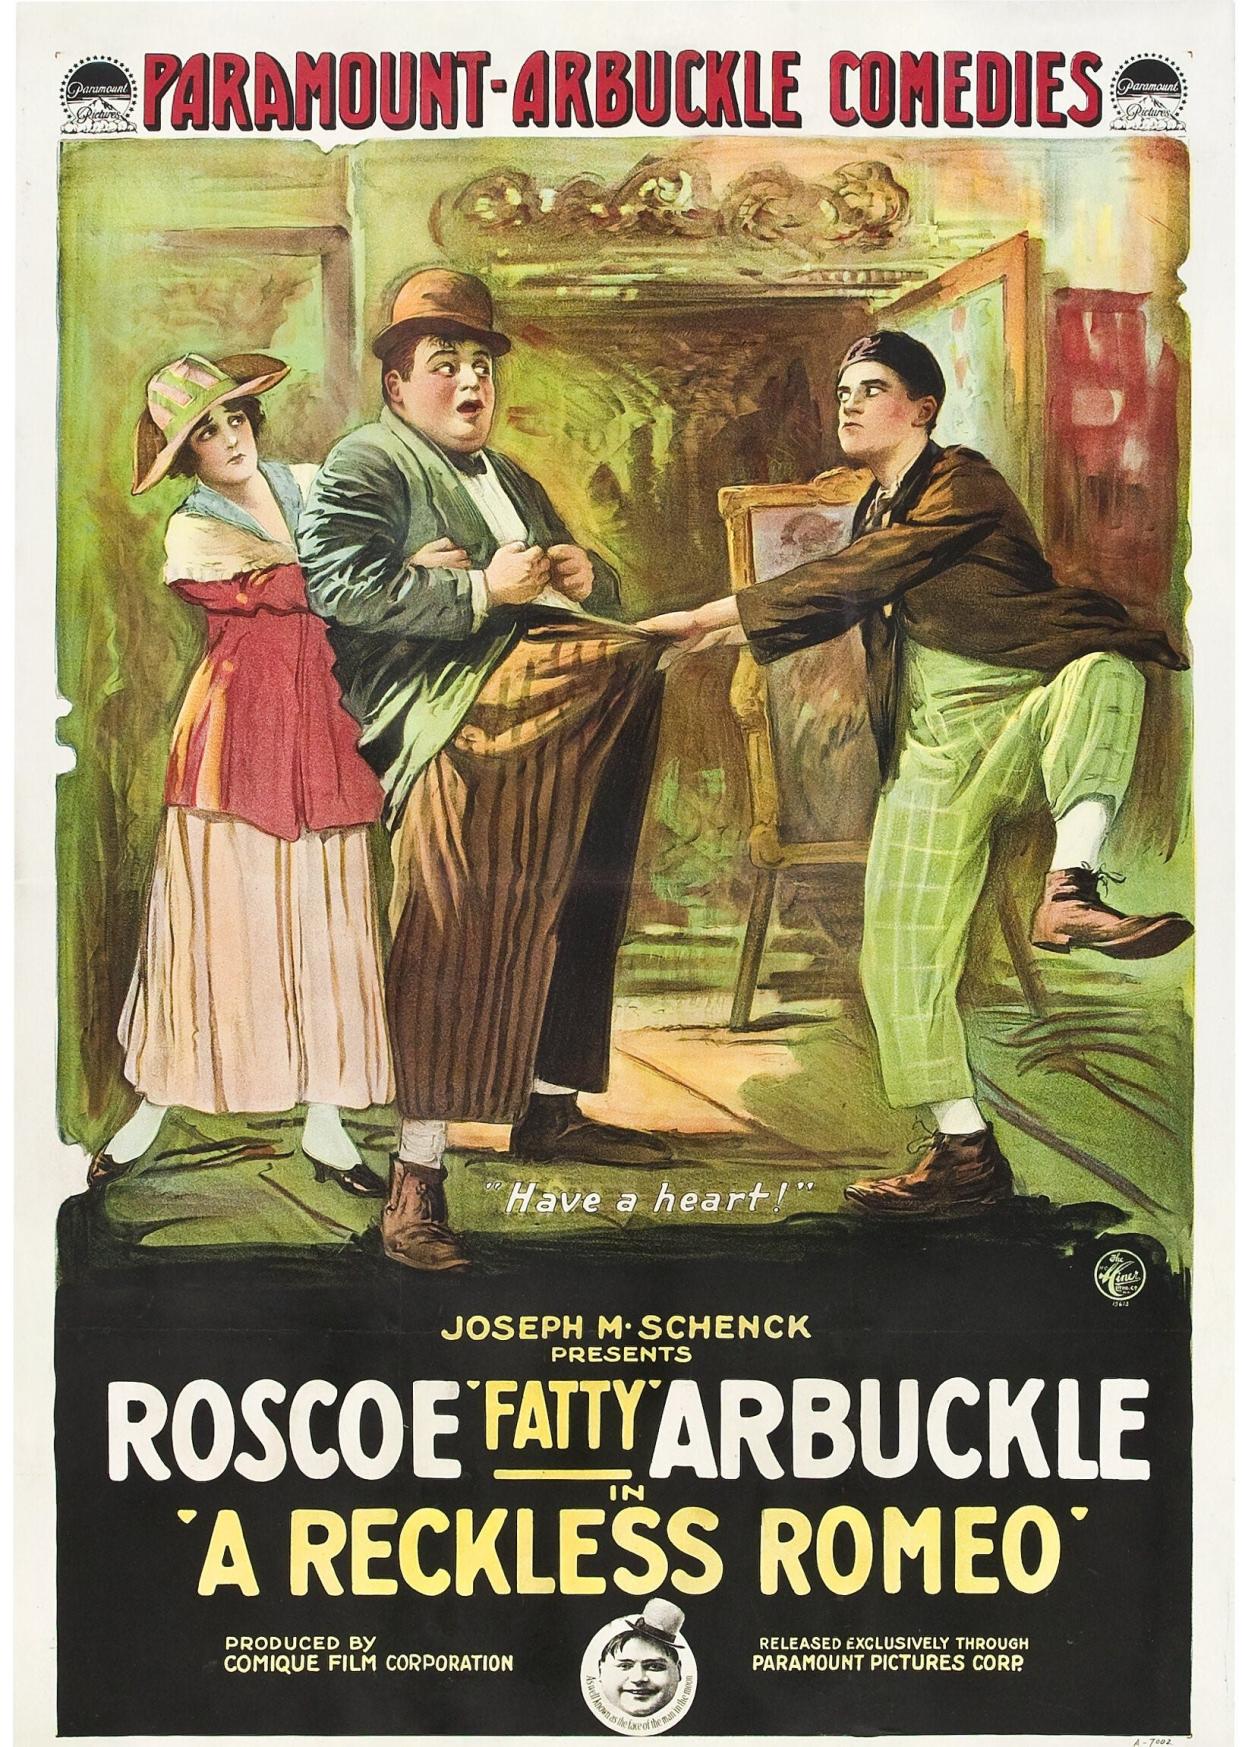 "A Reckless Romeo" starring Roscoe "Fatty" Arbuckle